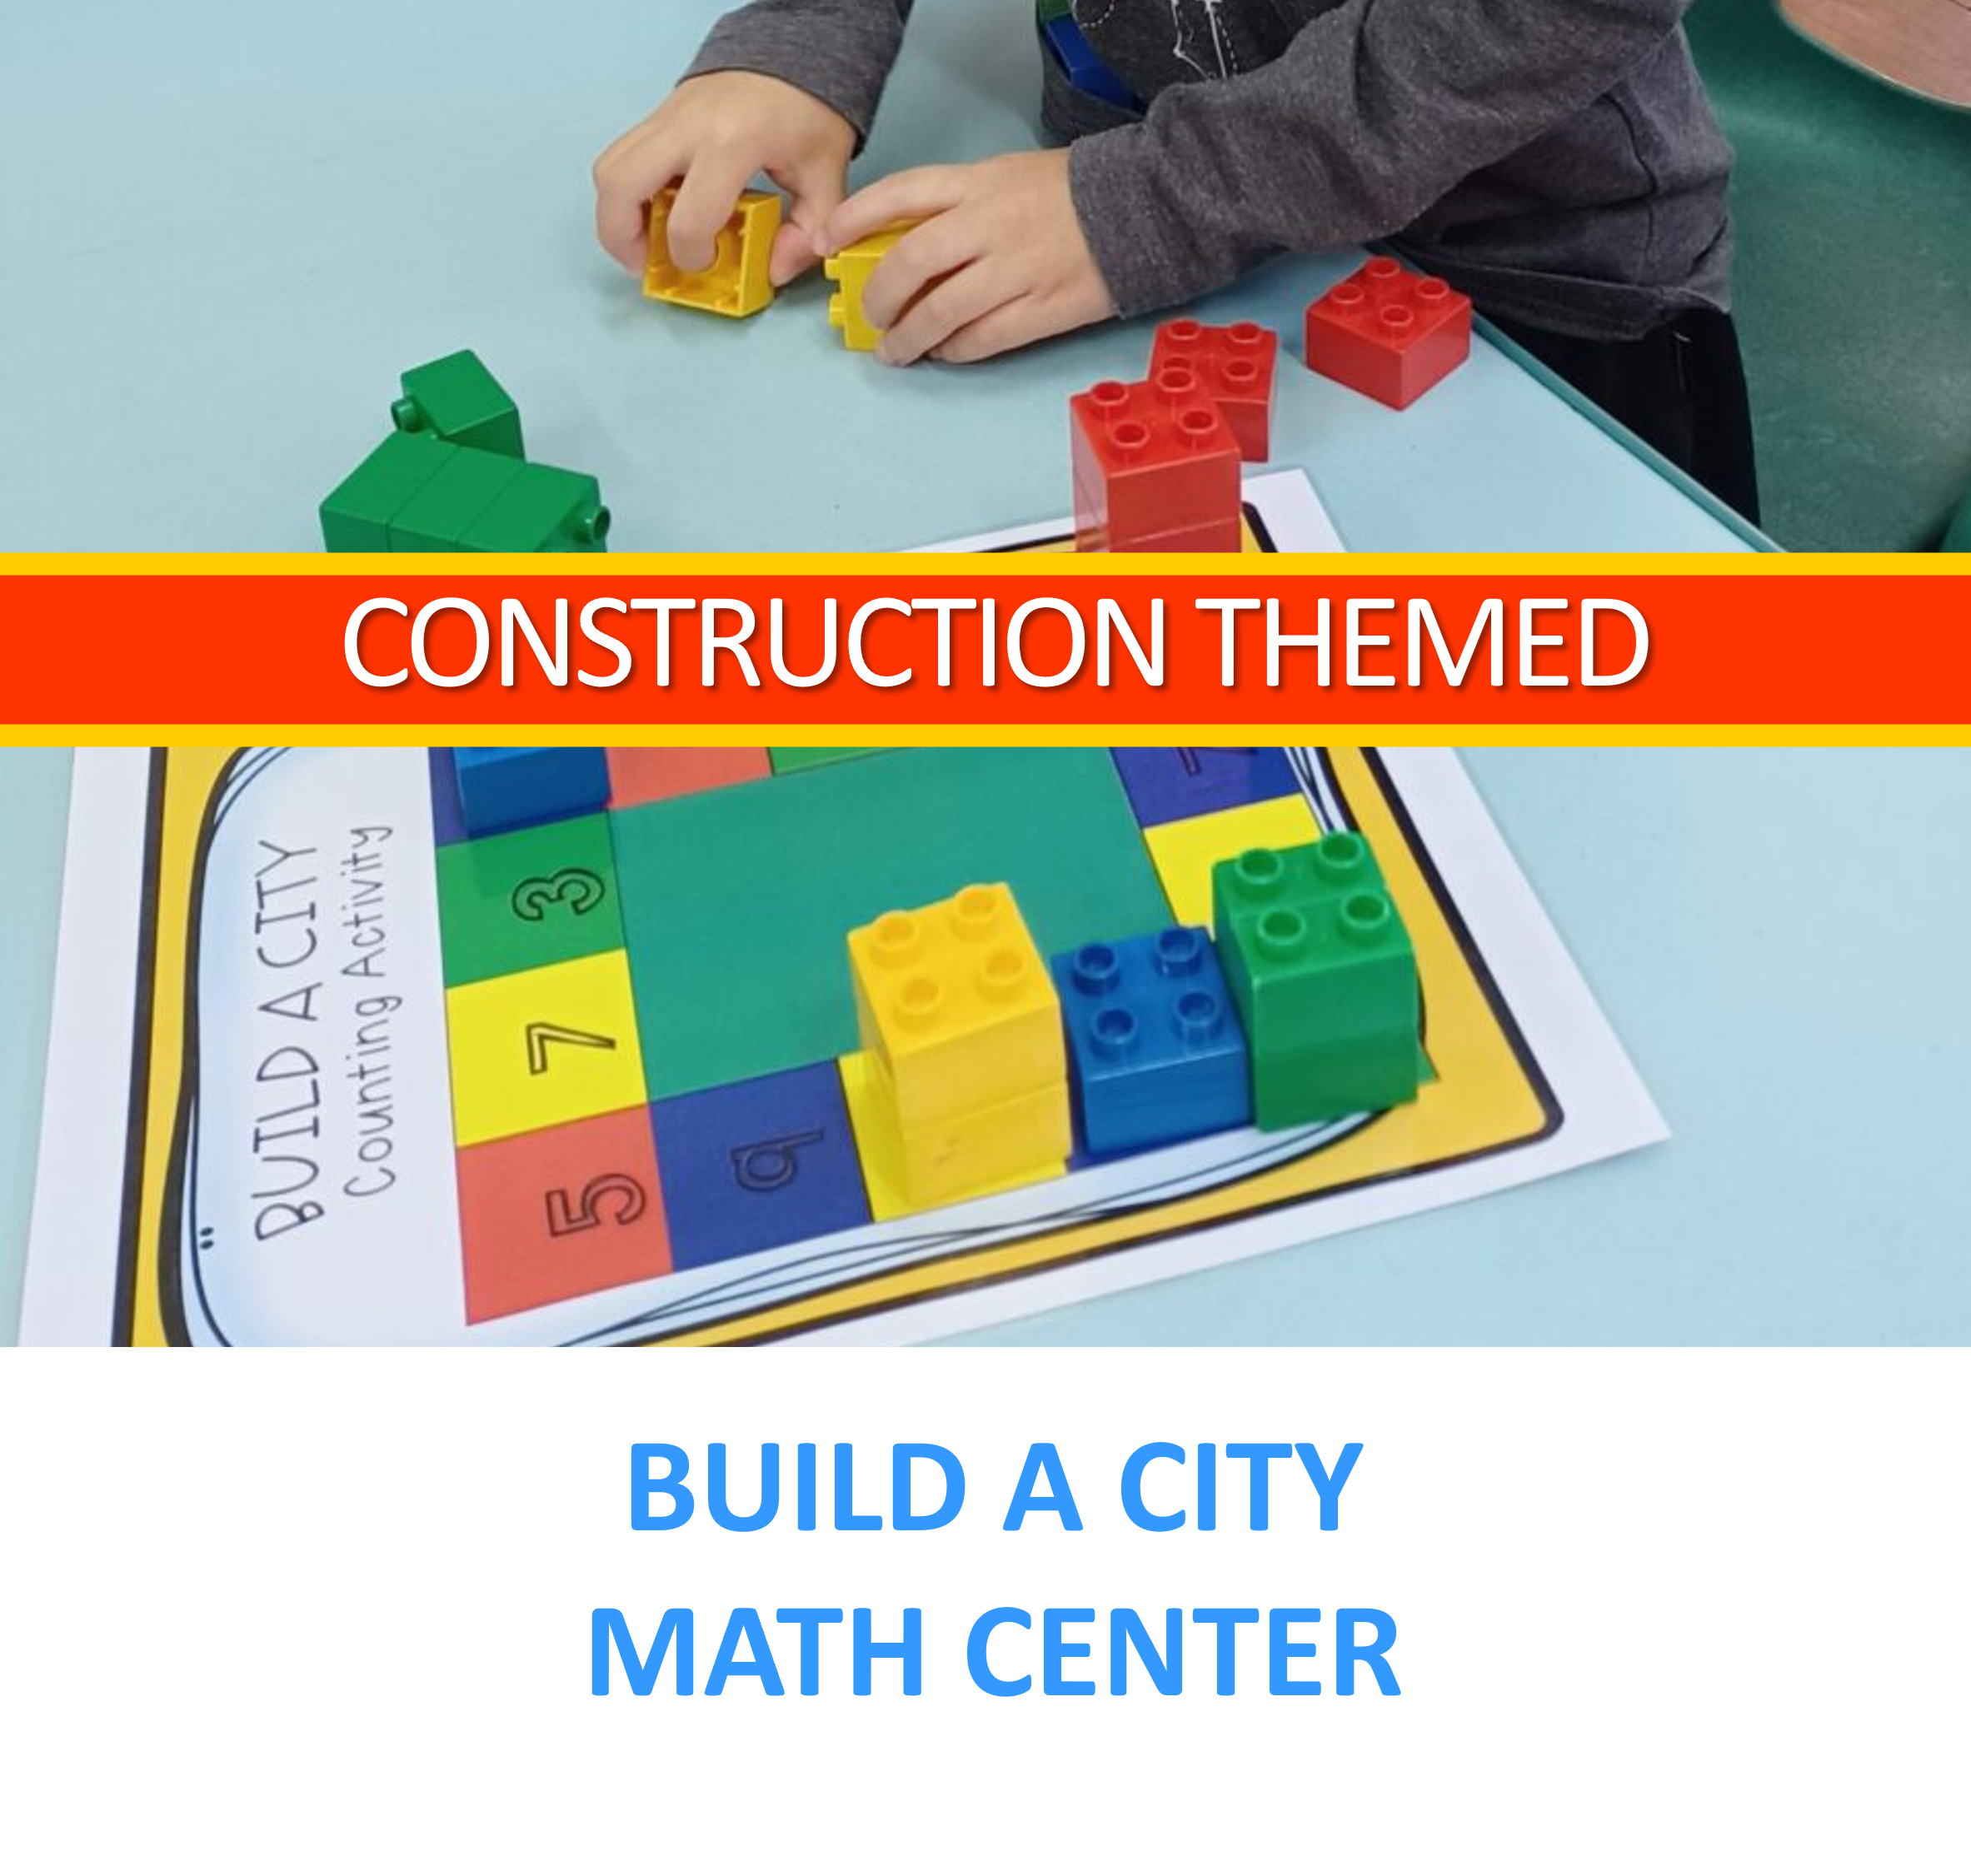 Construction themed activities